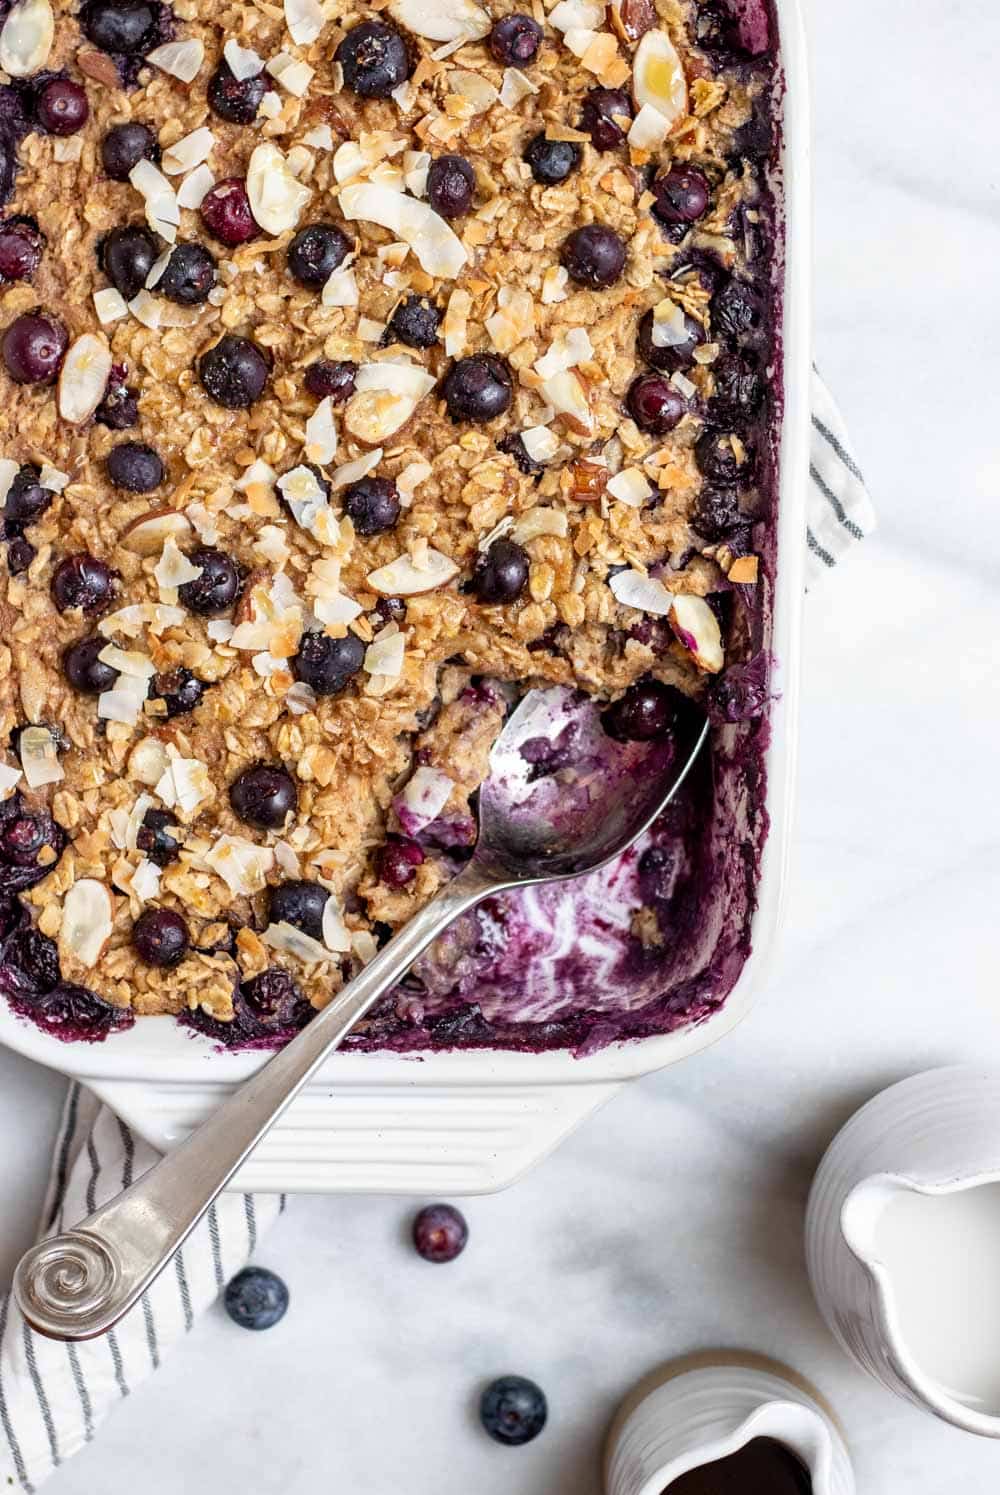 Blueberry baked oatmeal with a spoon on the side showing the berries.